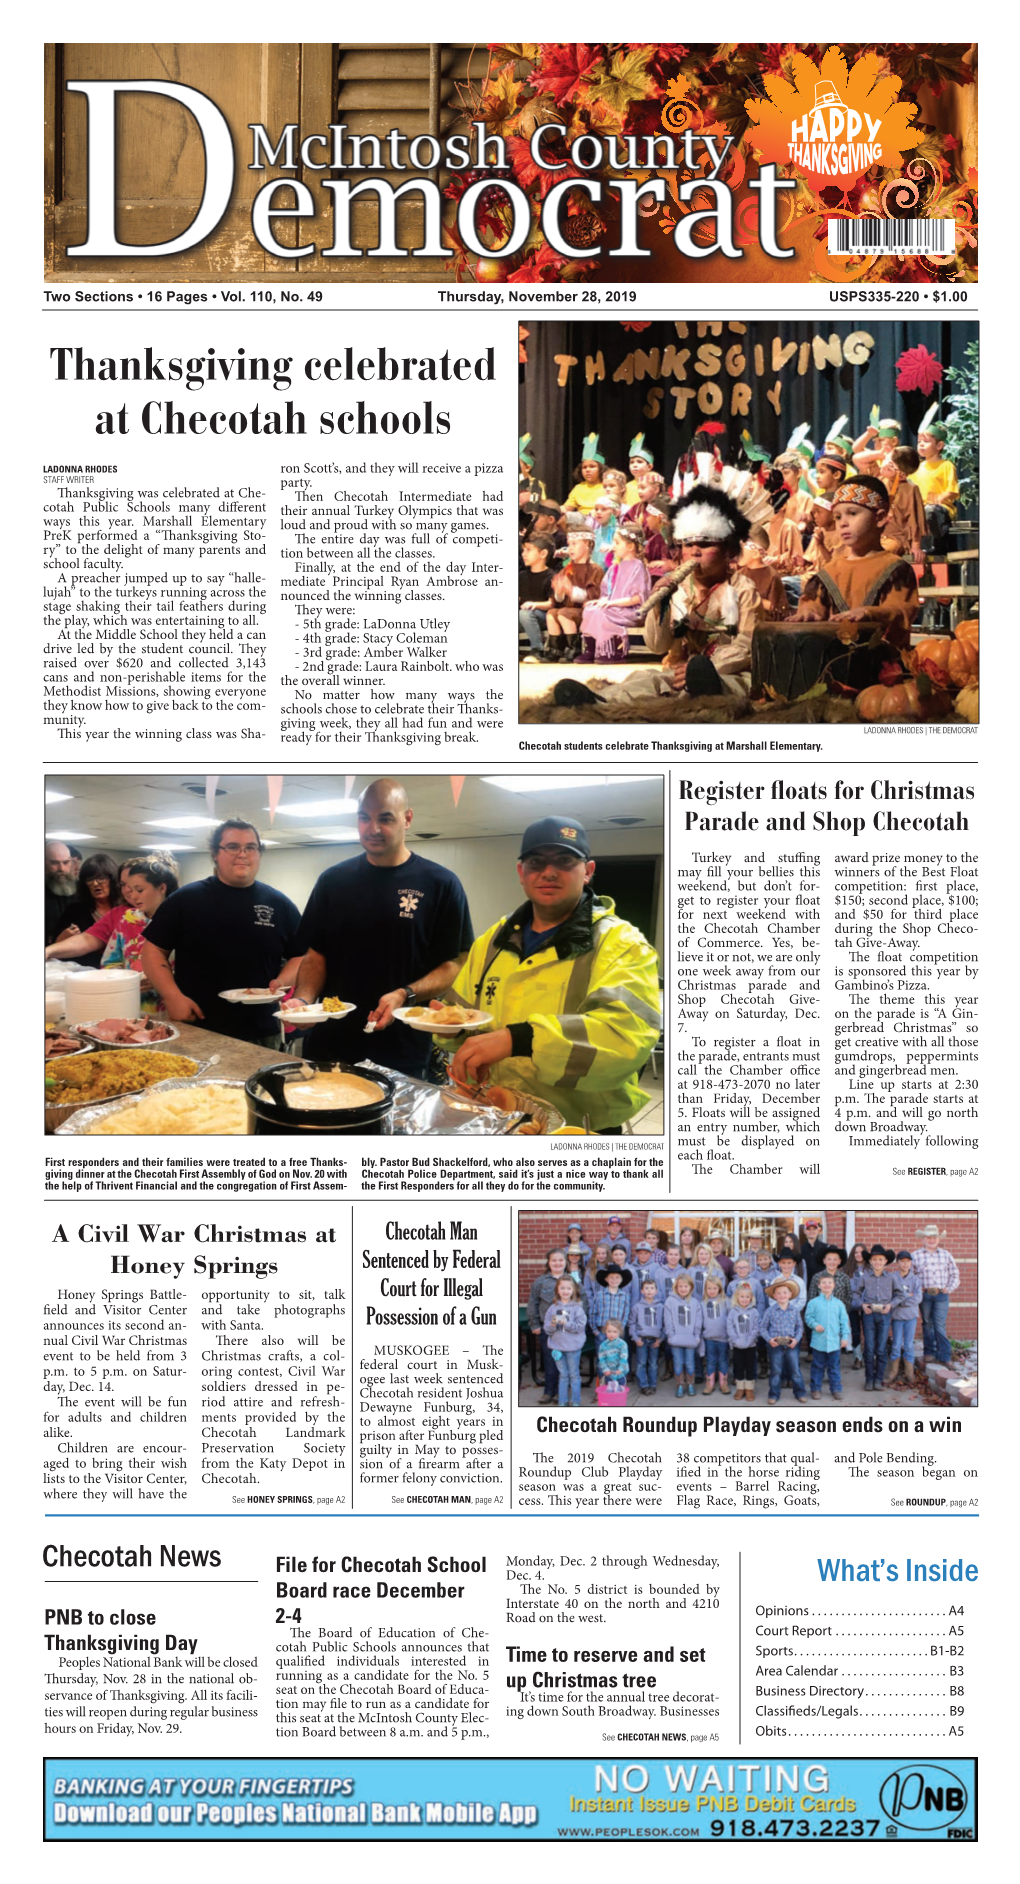 Thanksgiving Celebrated at Checotah Schools